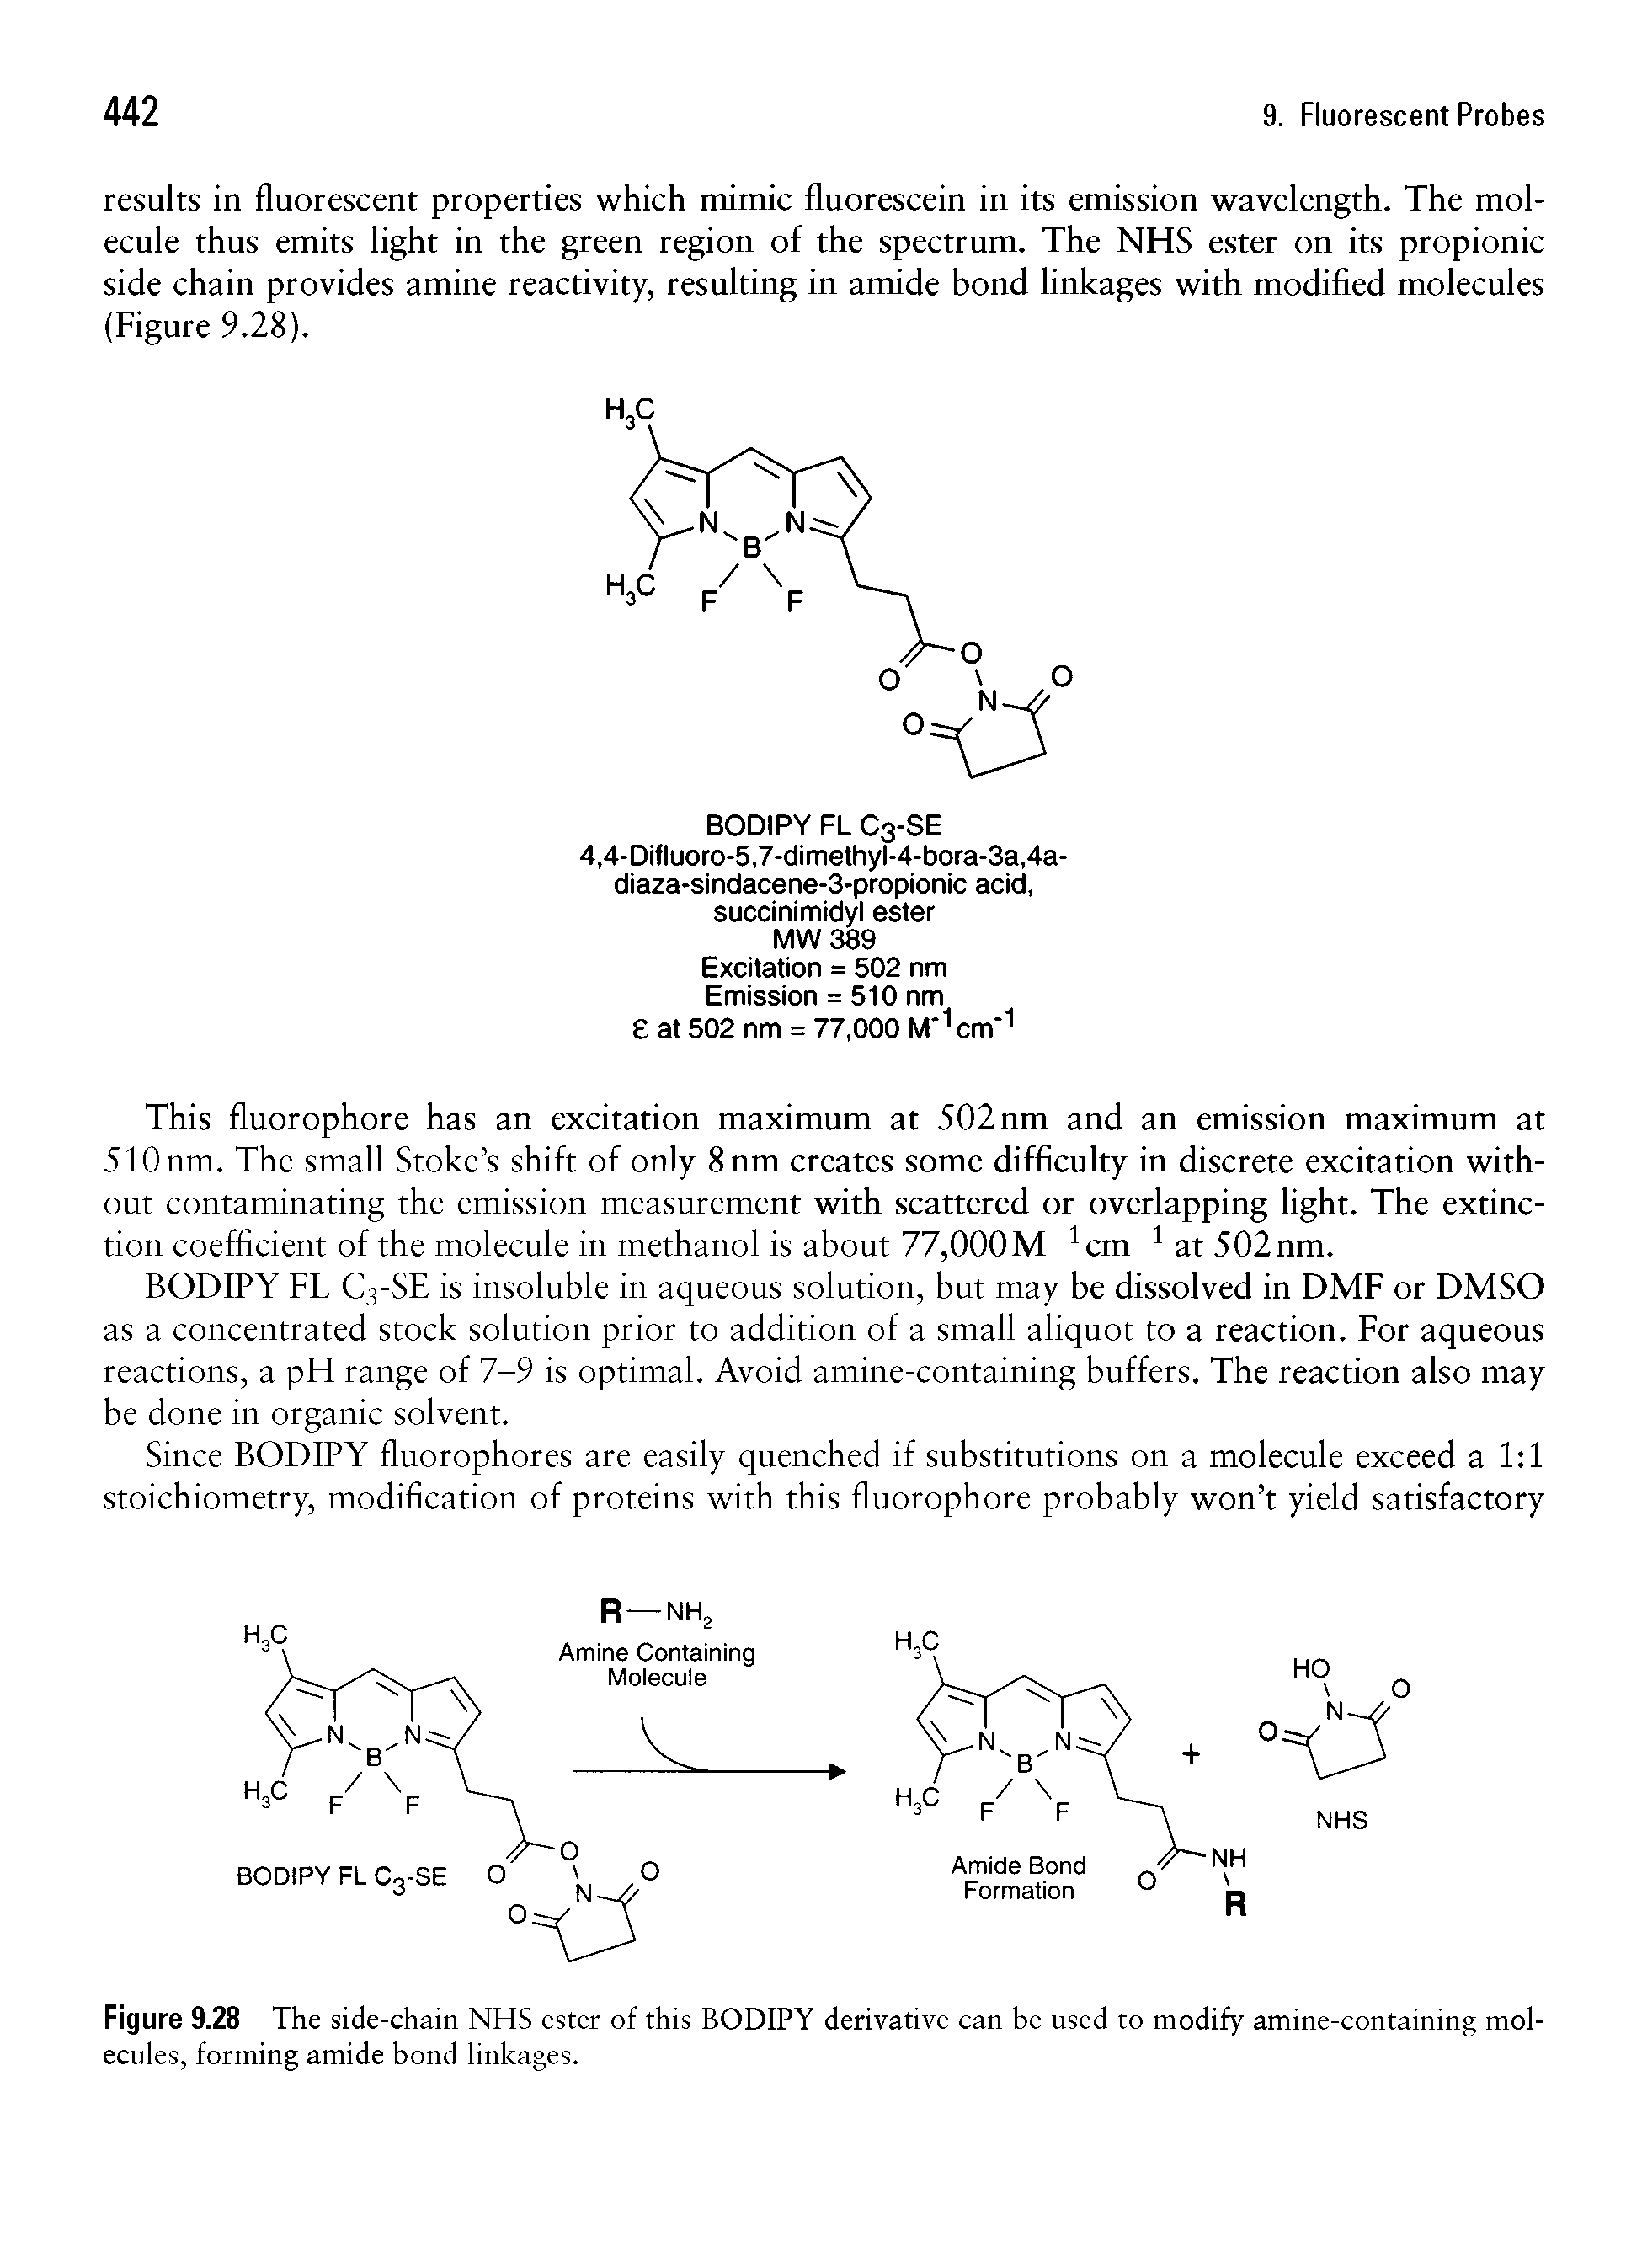 Figure 9.28 The side-chain NHS ester of this BODIPY derivative can be used to modify amine-containing molecules, forming amide bond linkages.